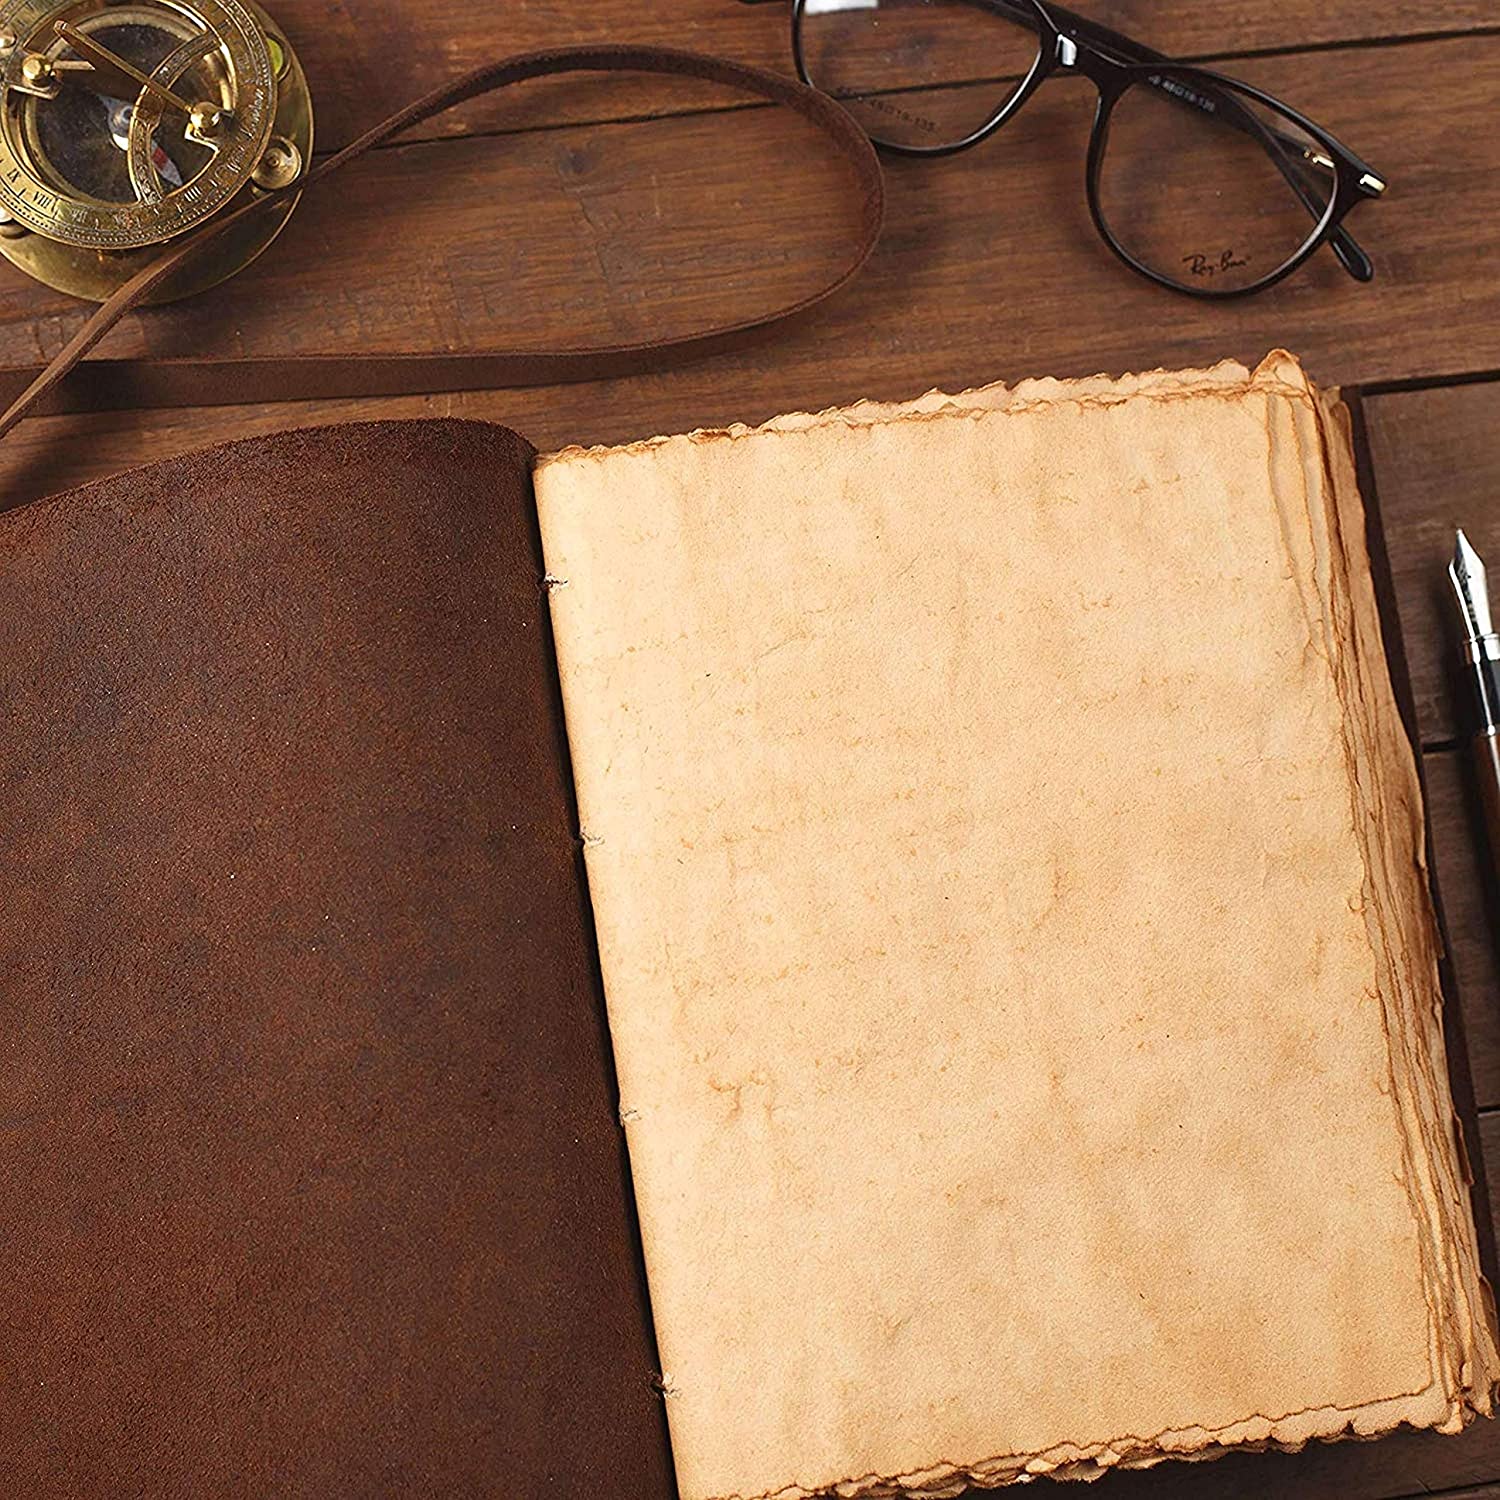 Vintage Leather Bound Journal Handmade Antique Deckle Edge Paper Leather for Men and Women